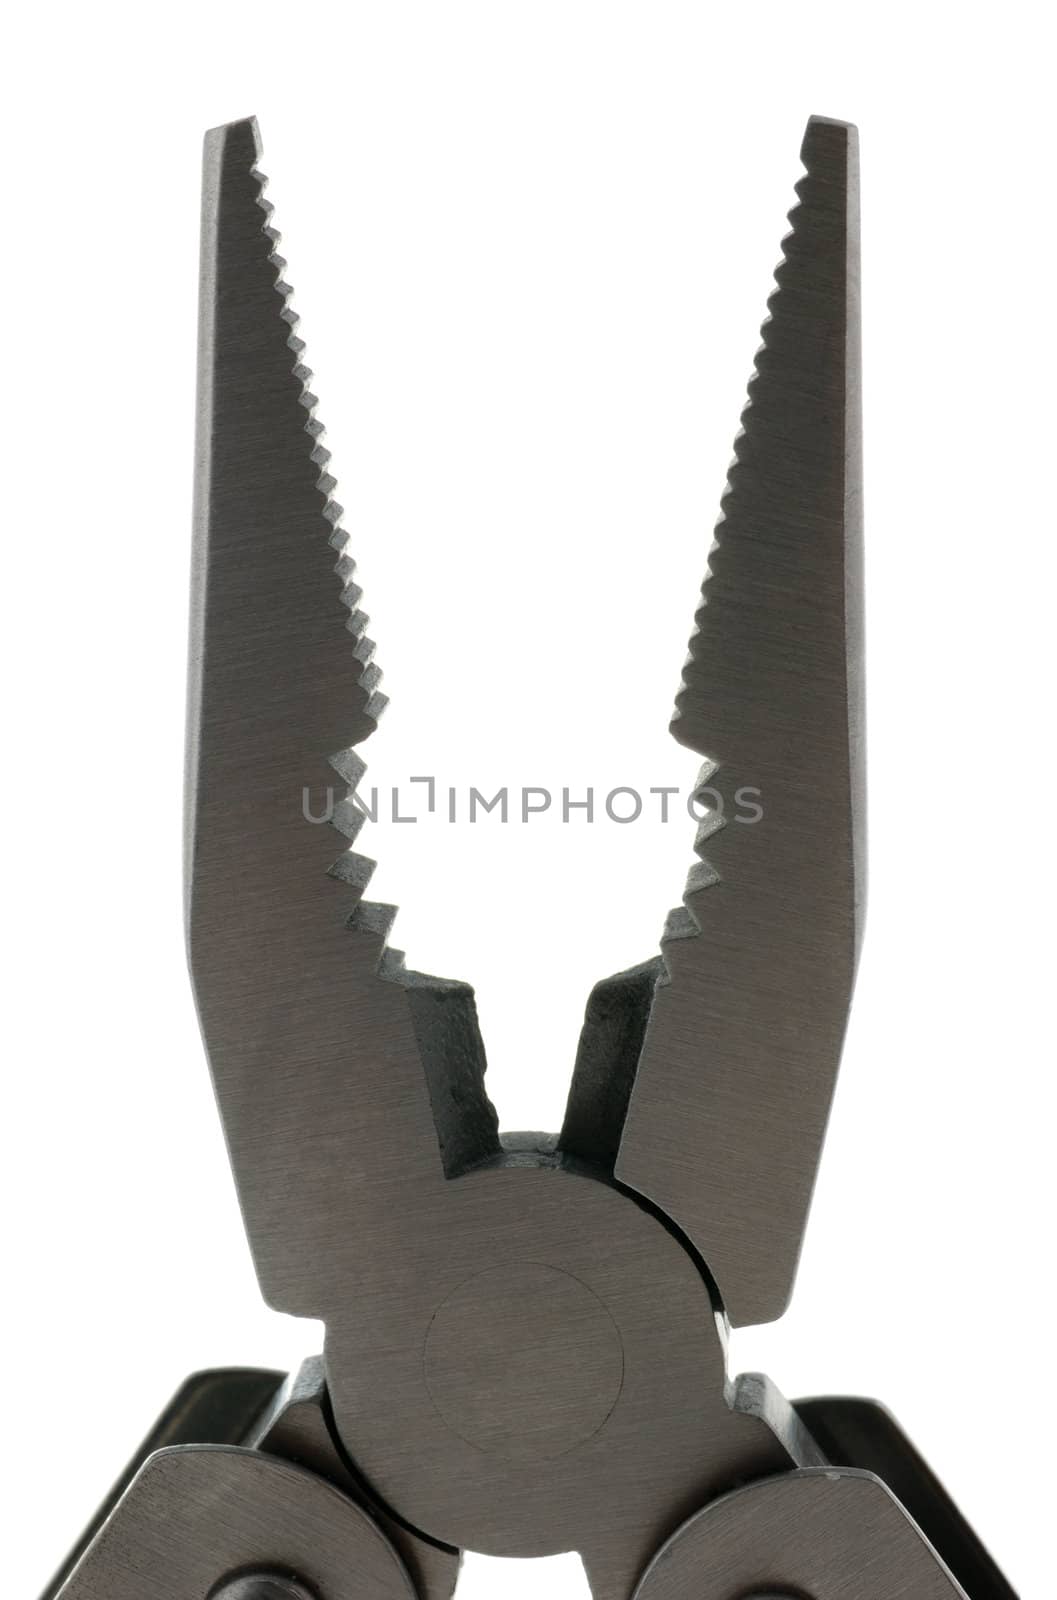 pliers. The manual tool from the chromeplated steel, isolated on a white background